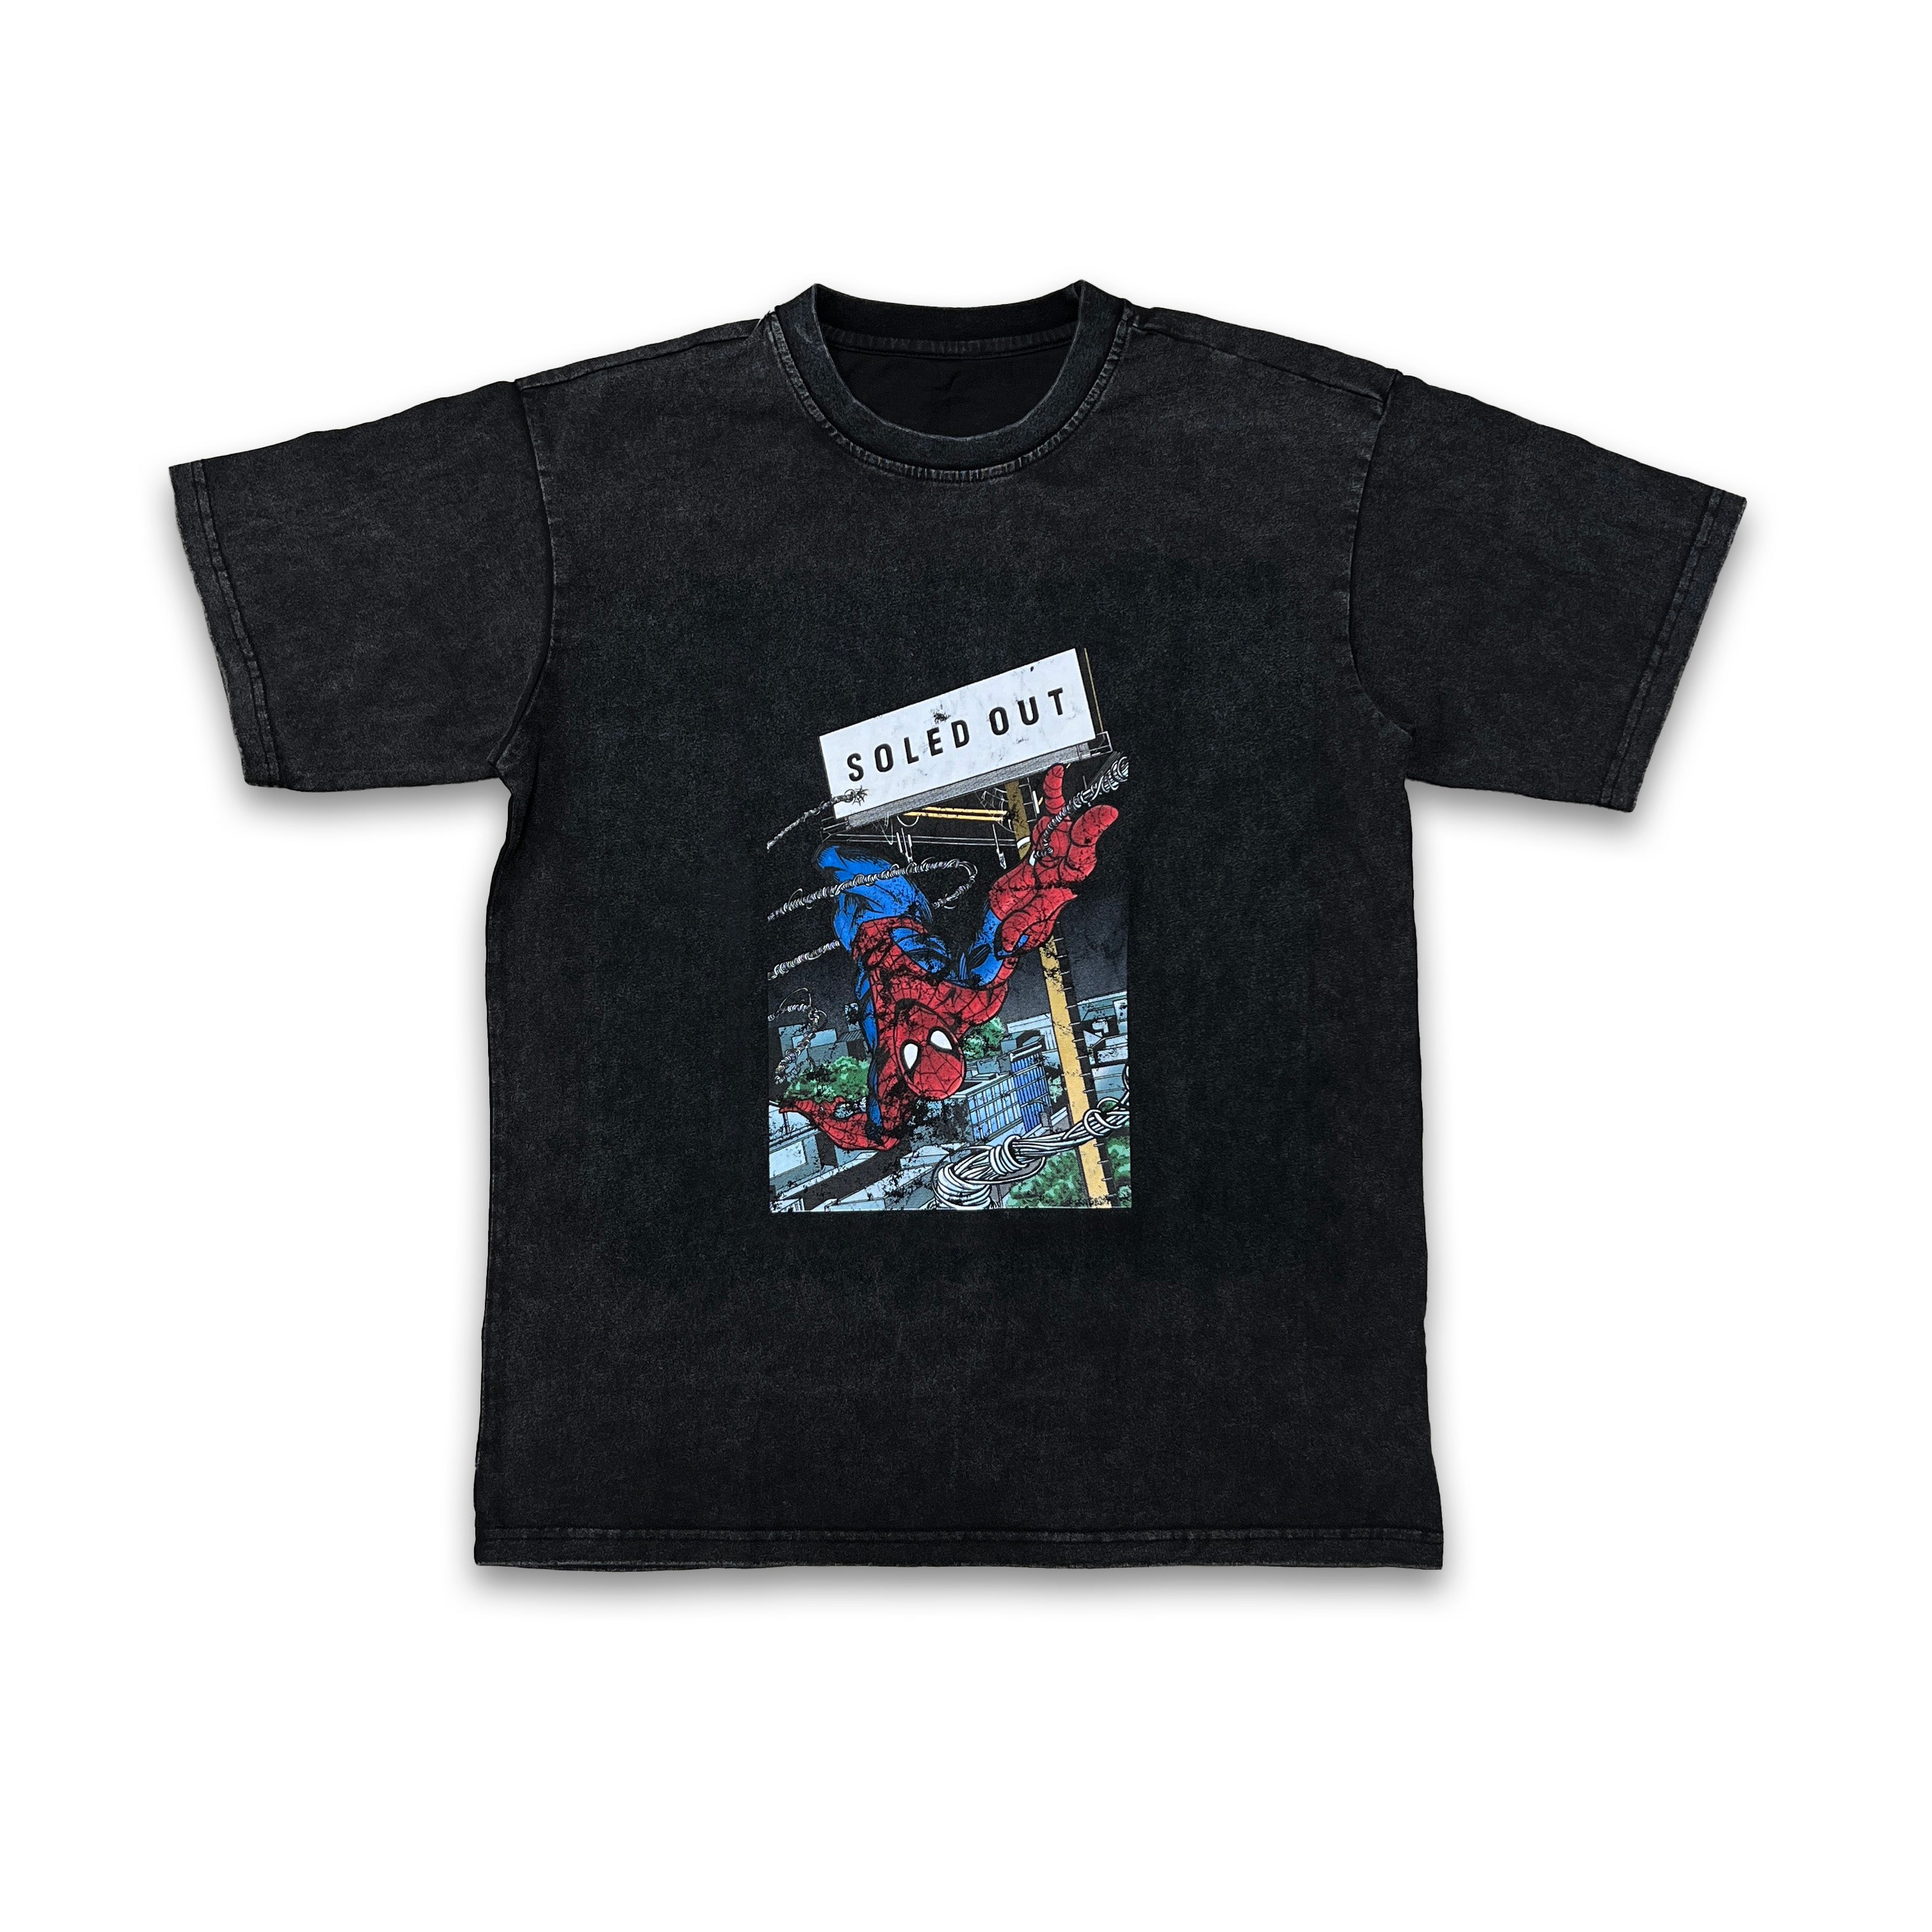 Soled Out T-Shirt "SPIDERMAN" Black New Size M